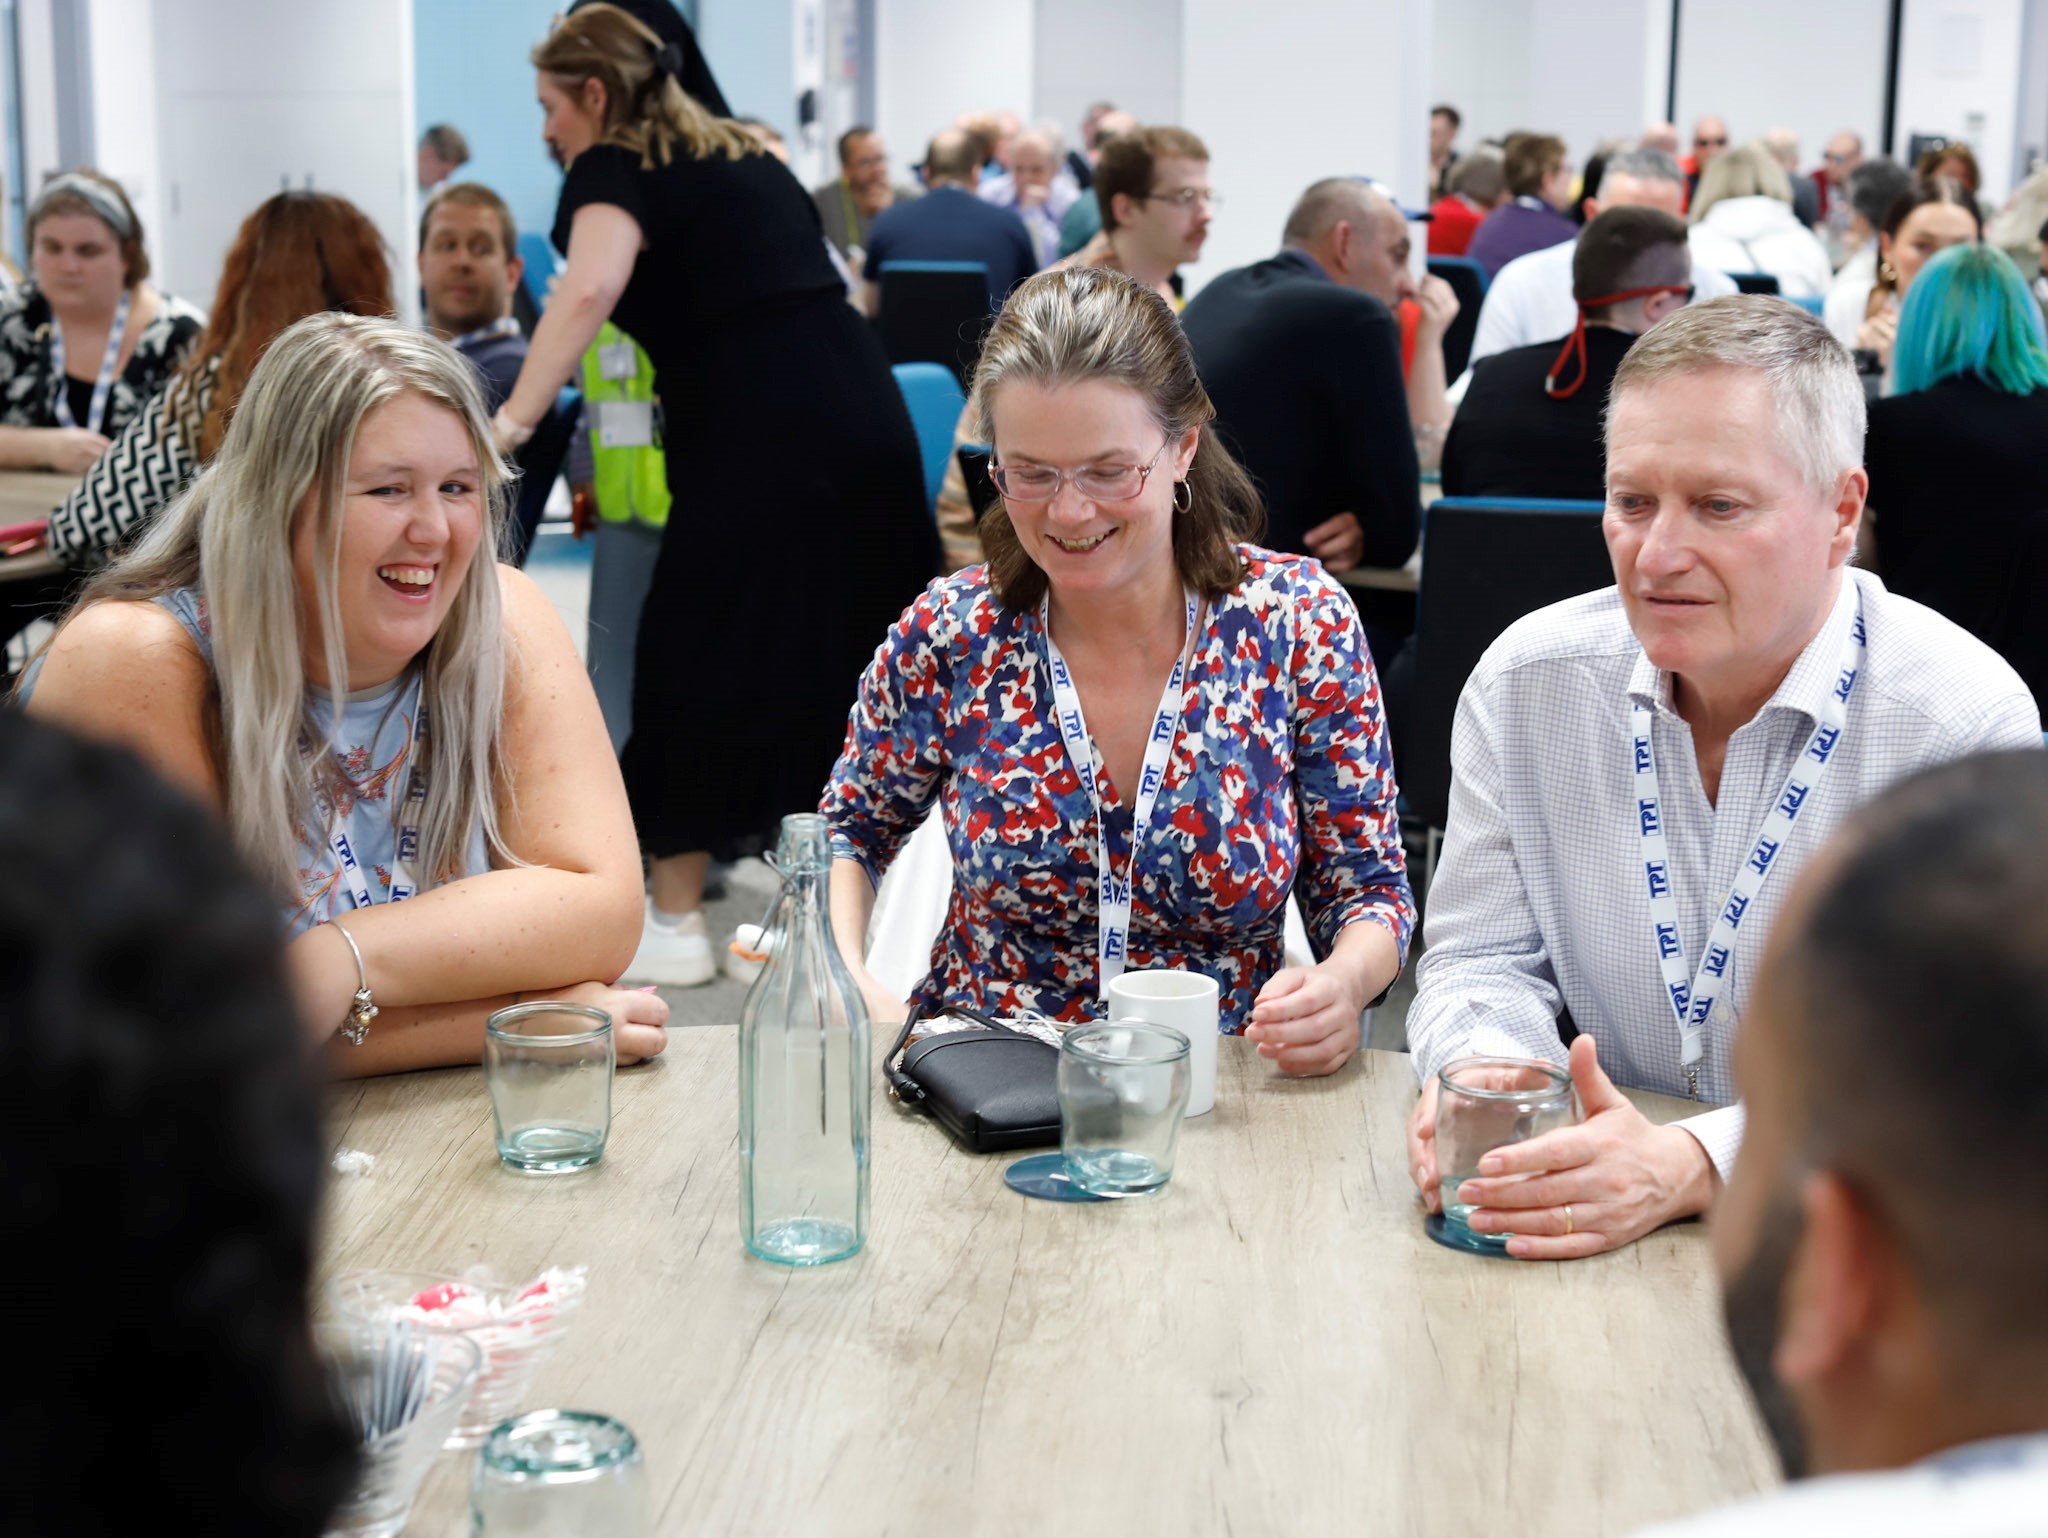 Leanne Best, Vicky Blencowe, and Harry Meade, from London Sight Loss Councils, seated at a round table laughing.